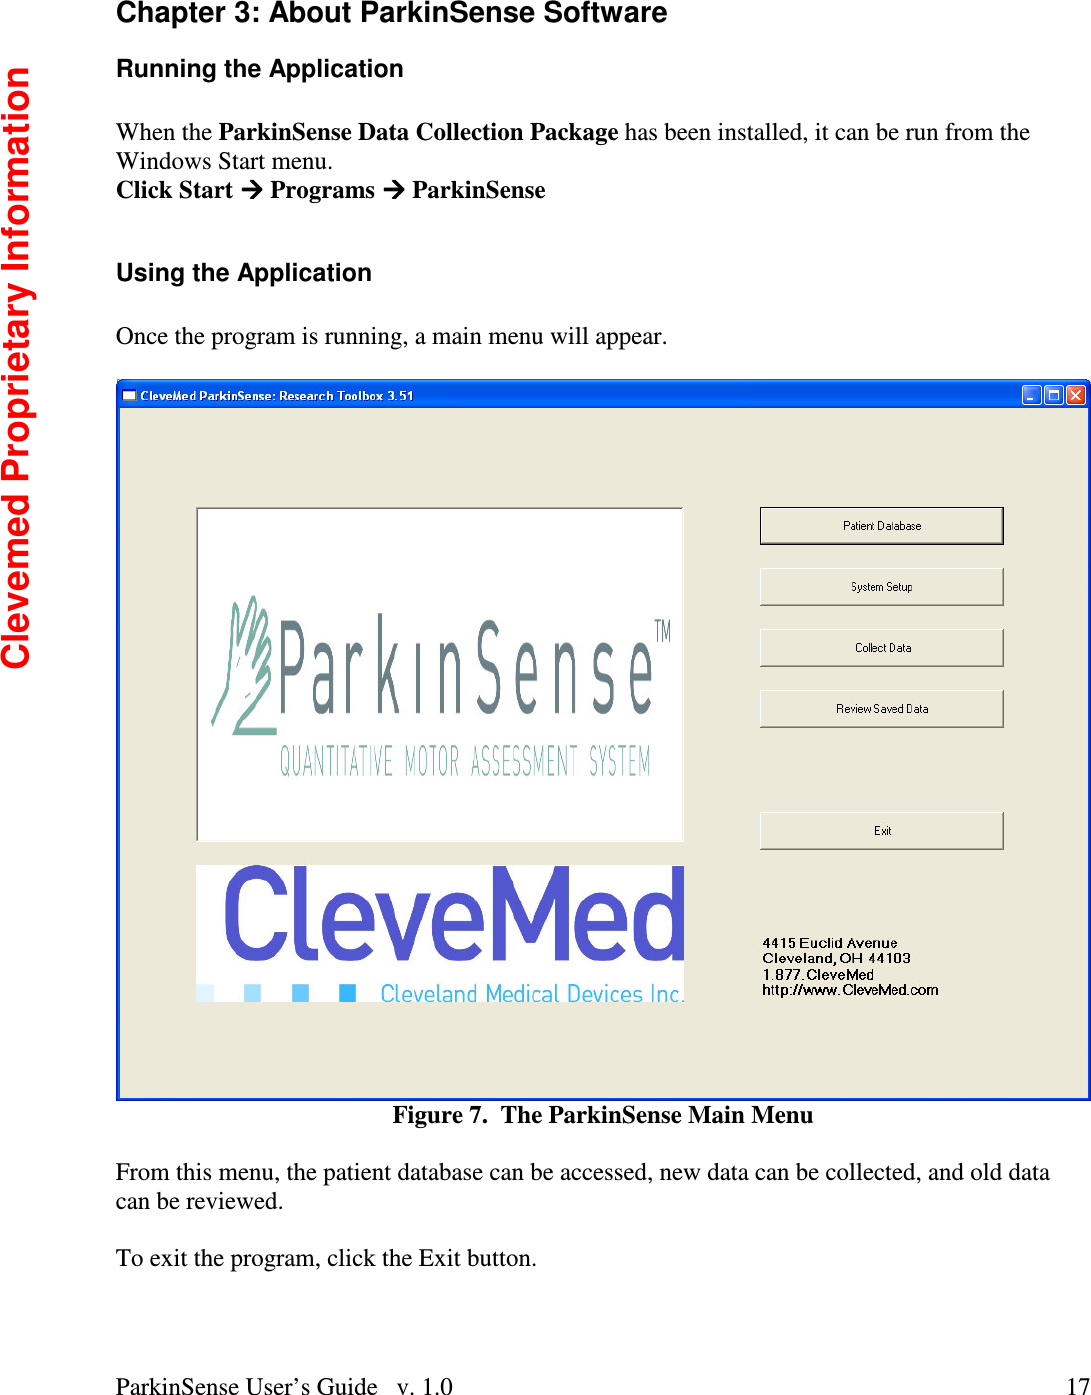 ParkinSense User’s Guide   v. 1.0  17Chapter 3: About ParkinSense Software Running the Application  When the ParkinSense Data Collection Package has been installed, it can be run from the Windows Start menu. Click Start  Programs  ParkinSense  Using the Application  Once the program is running, a main menu will appear.     Figure 7.  The ParkinSense Main Menu  From this menu, the patient database can be accessed, new data can be collected, and old data can be reviewed.    To exit the program, click the Exit button.  Clevemed Proprietary Information